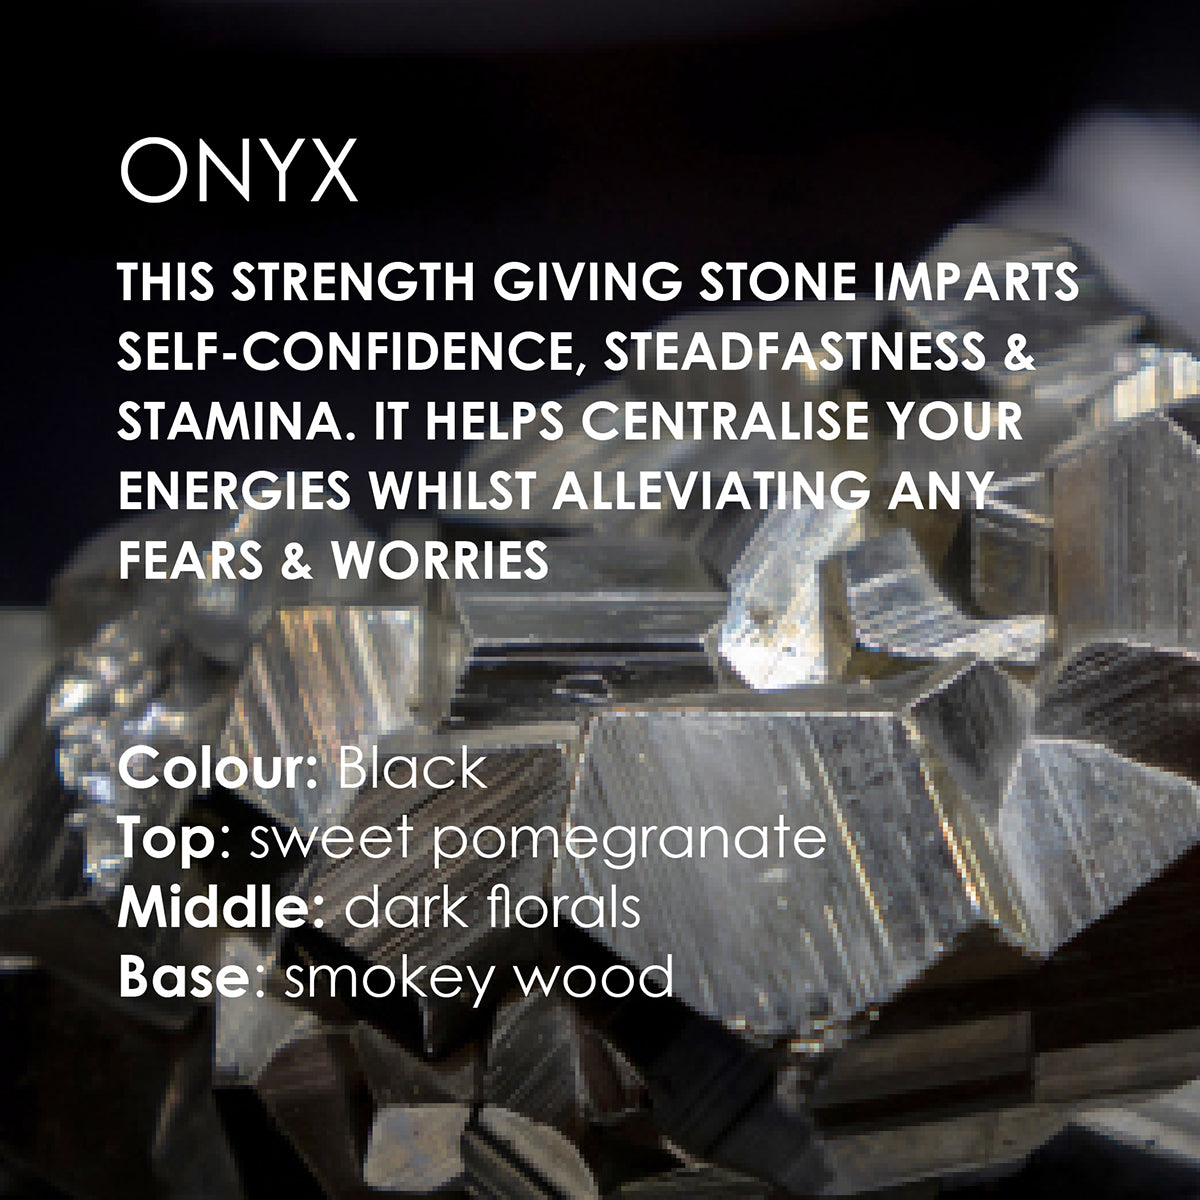 Promotional image for 360 Botanics ONYX range, outlining the fragrance profile. The text states: 'ONYX - This strength-giving stone bestows self-confidence, steadfastness & stamina. It aids in centralising your energies whilst alleviating any fears & worries. Colour: Black, Top: sweet pomegranate, Middle: dark florals, Base: smoky wood.' The backdrop displays reflective black crystals, highlighting the product's luxurious and powerful nature